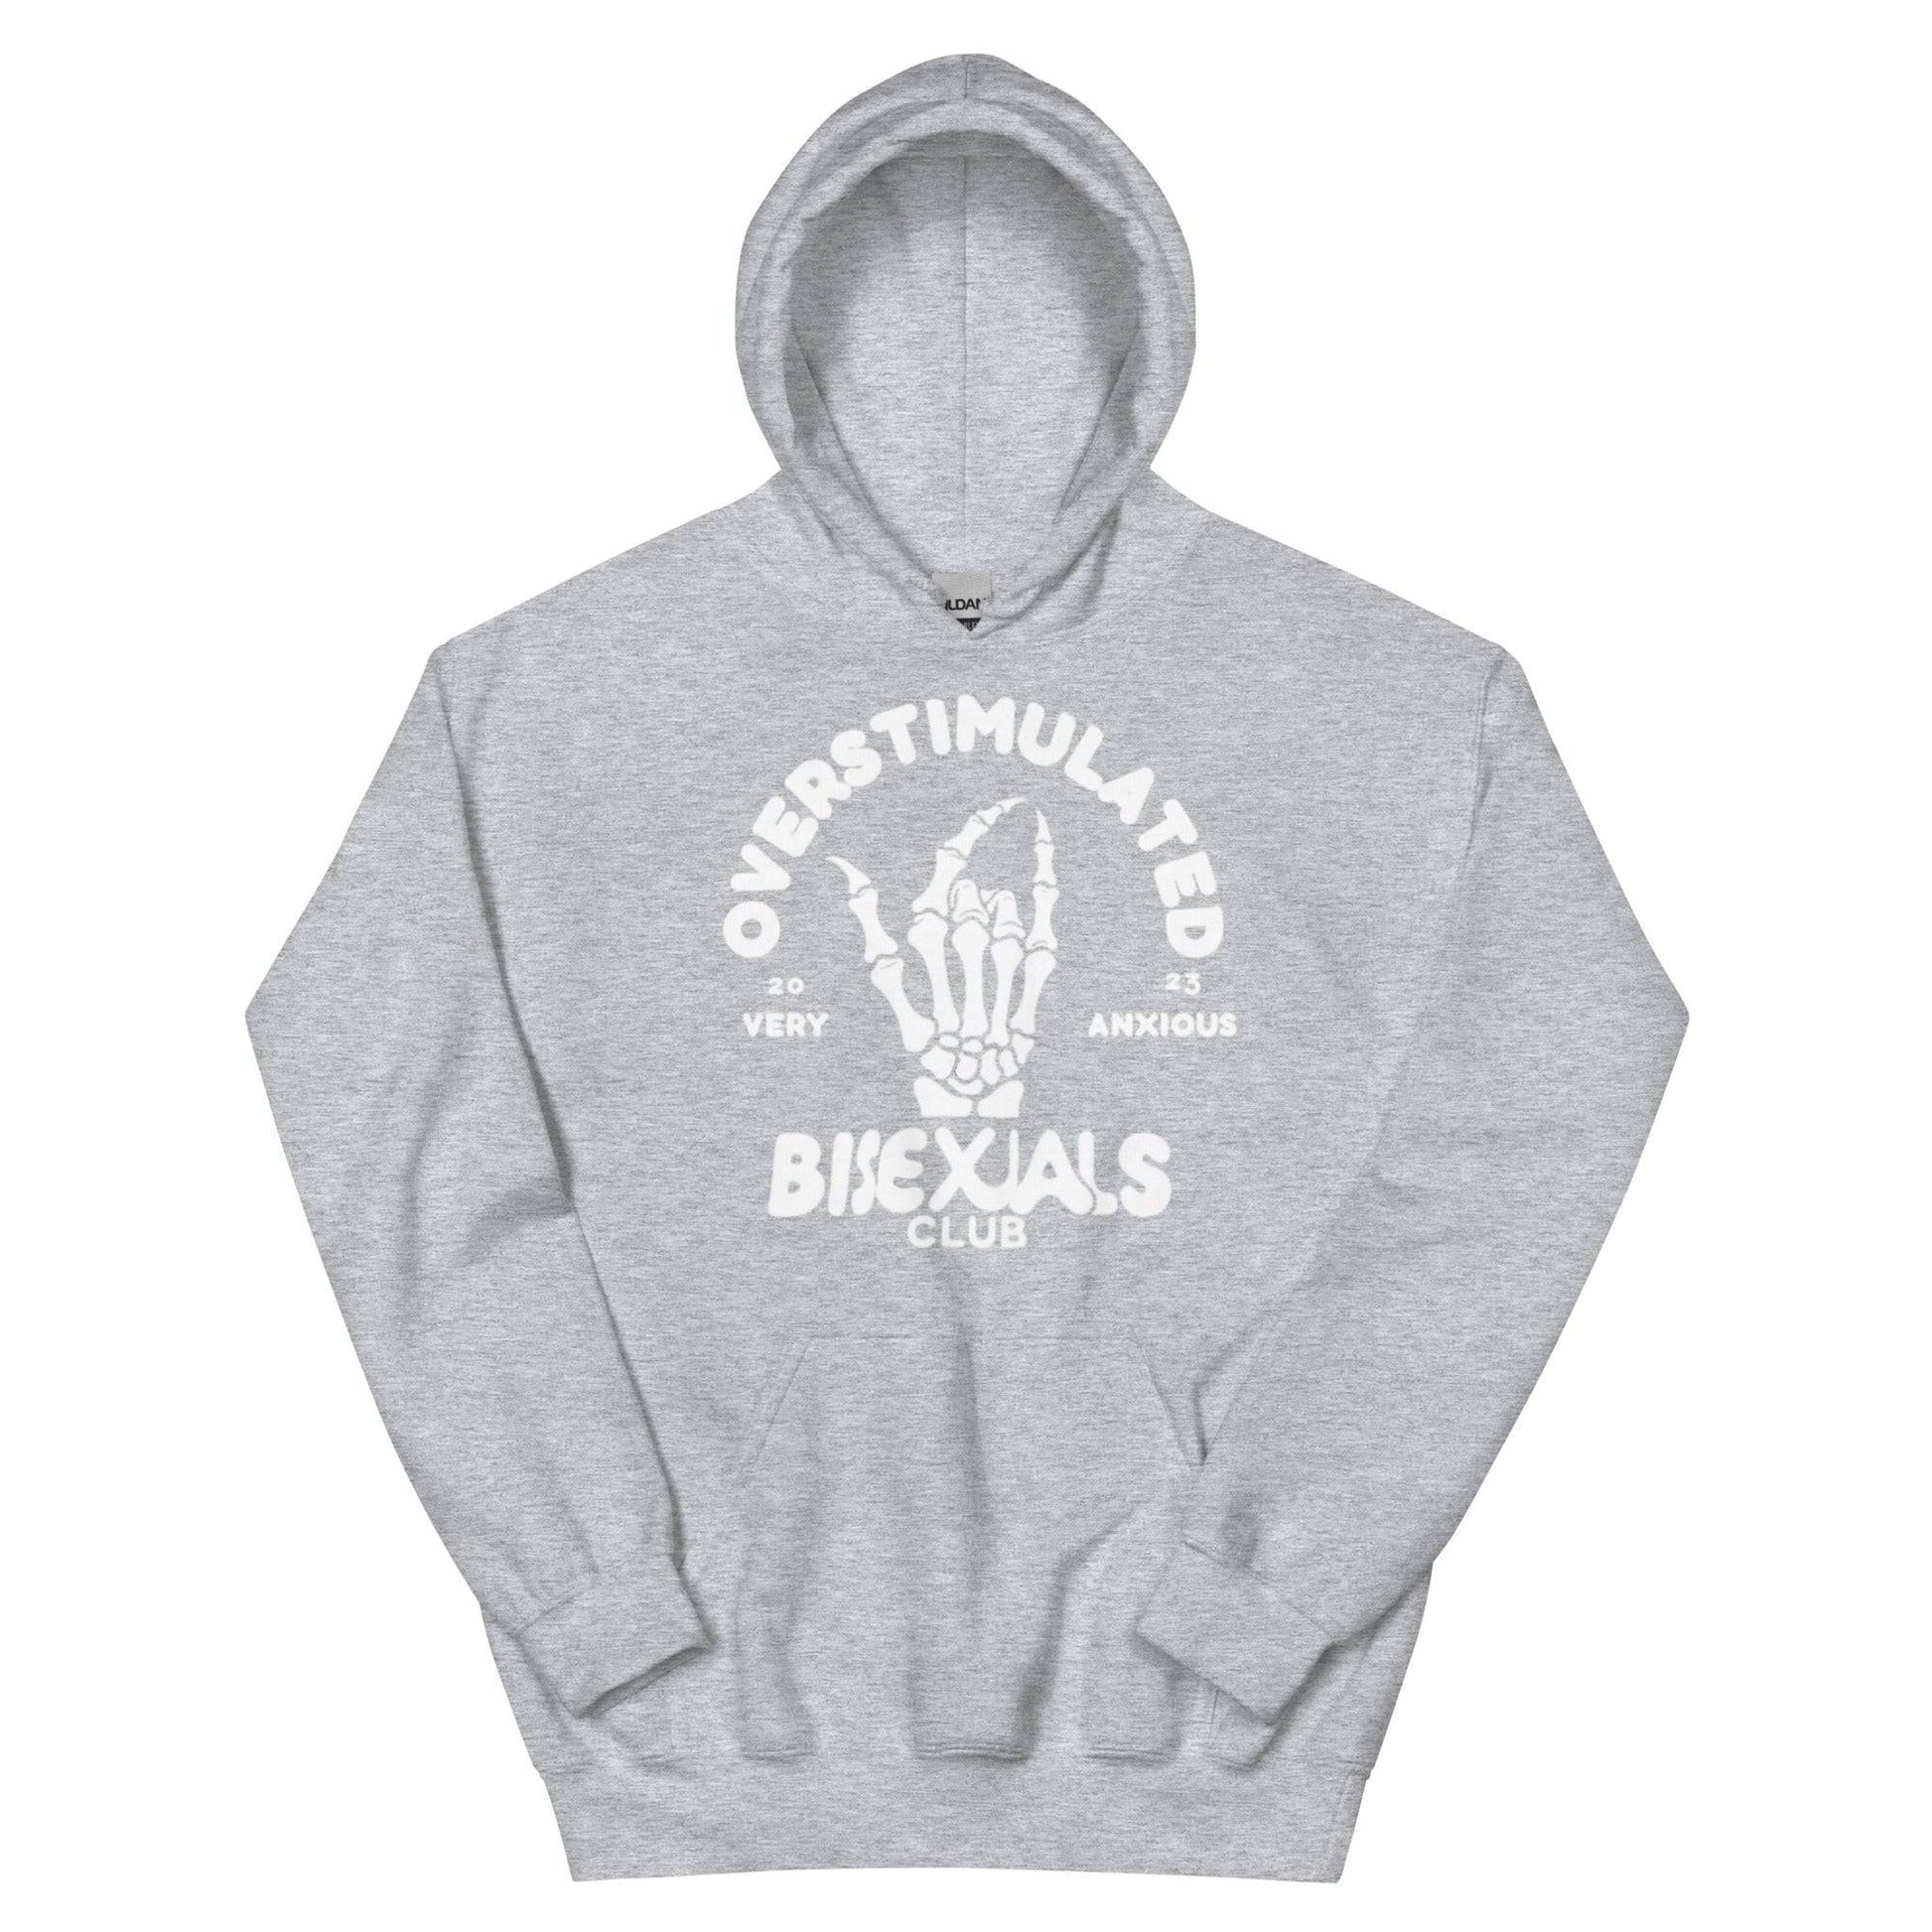 Overstimulated Bisexuals Club Hoodie - Rose Gold Co. Shop